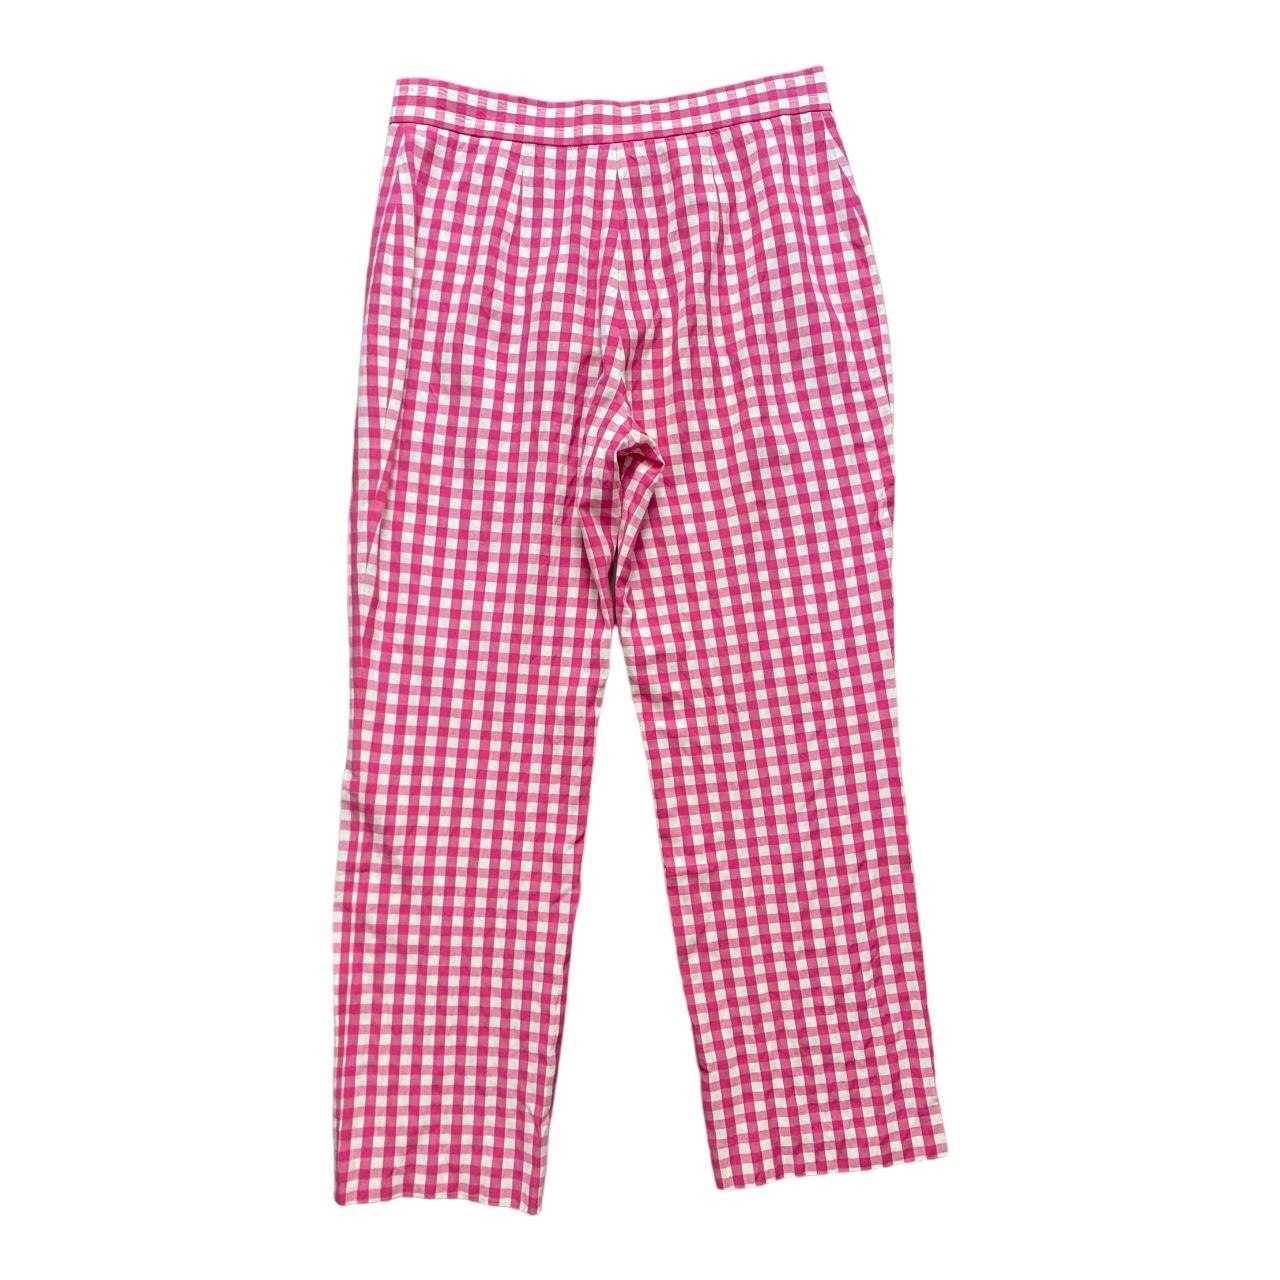 Moschino Cheap & Chic Women's Pink and White Trousers (2)